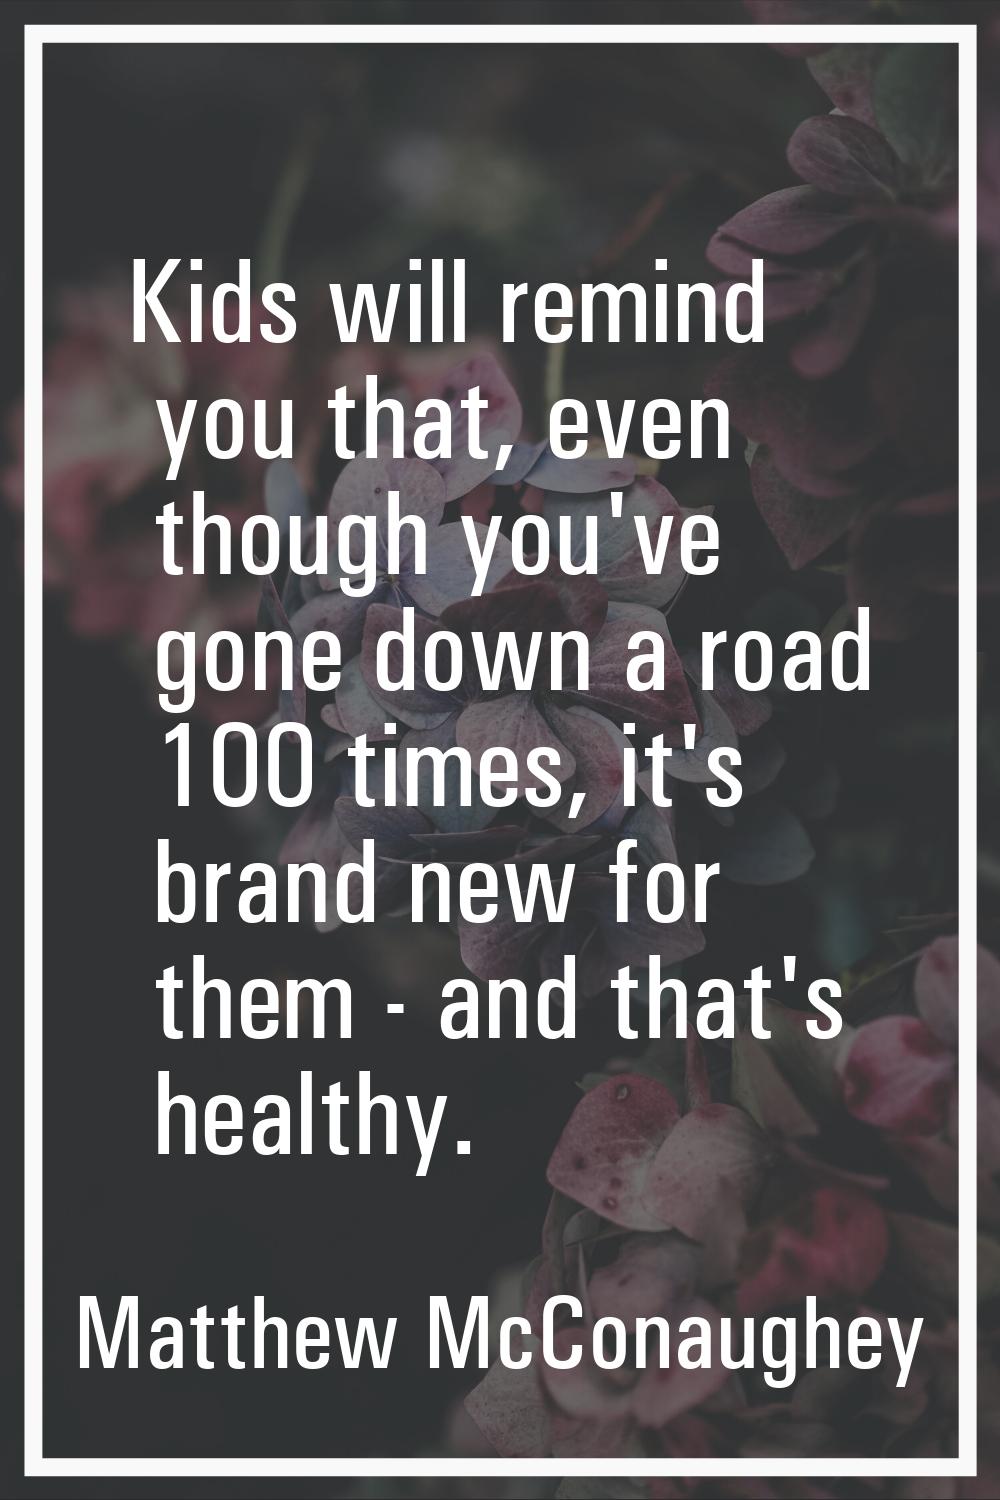 Kids will remind you that, even though you've gone down a road 100 times, it's brand new for them -